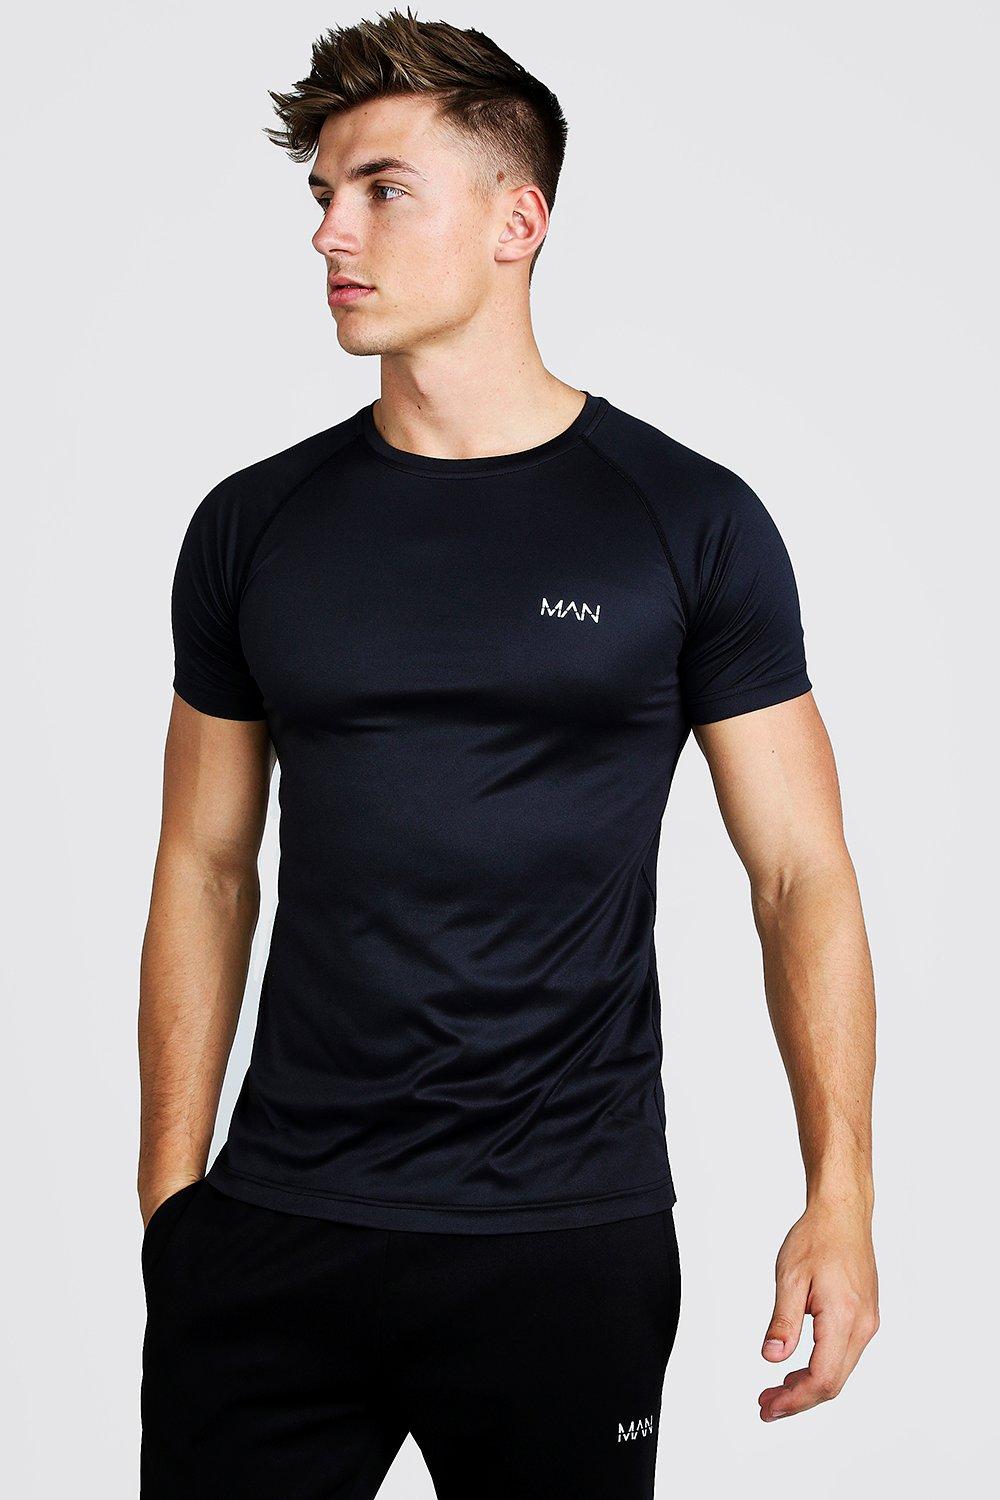 boohooMAN Man Active Gym Athletic Boxy Fit T-Shirt - Size XS